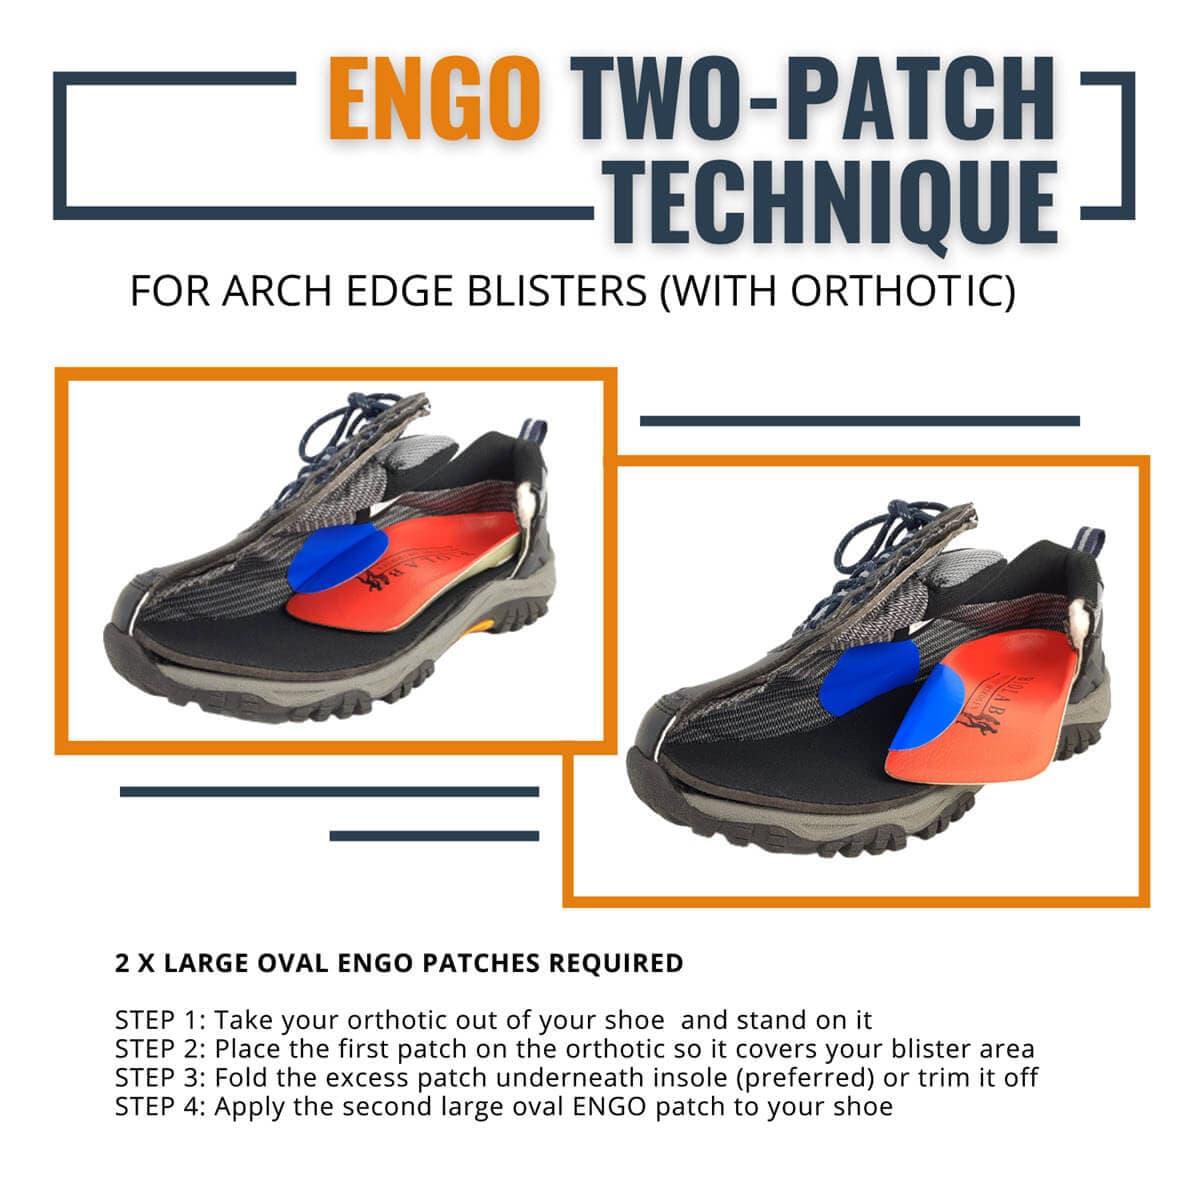 ENGO Blister Patches 4-Pack 6-Pack 30-Pack large oval patches using two patch technique for arch blisters with orthotics